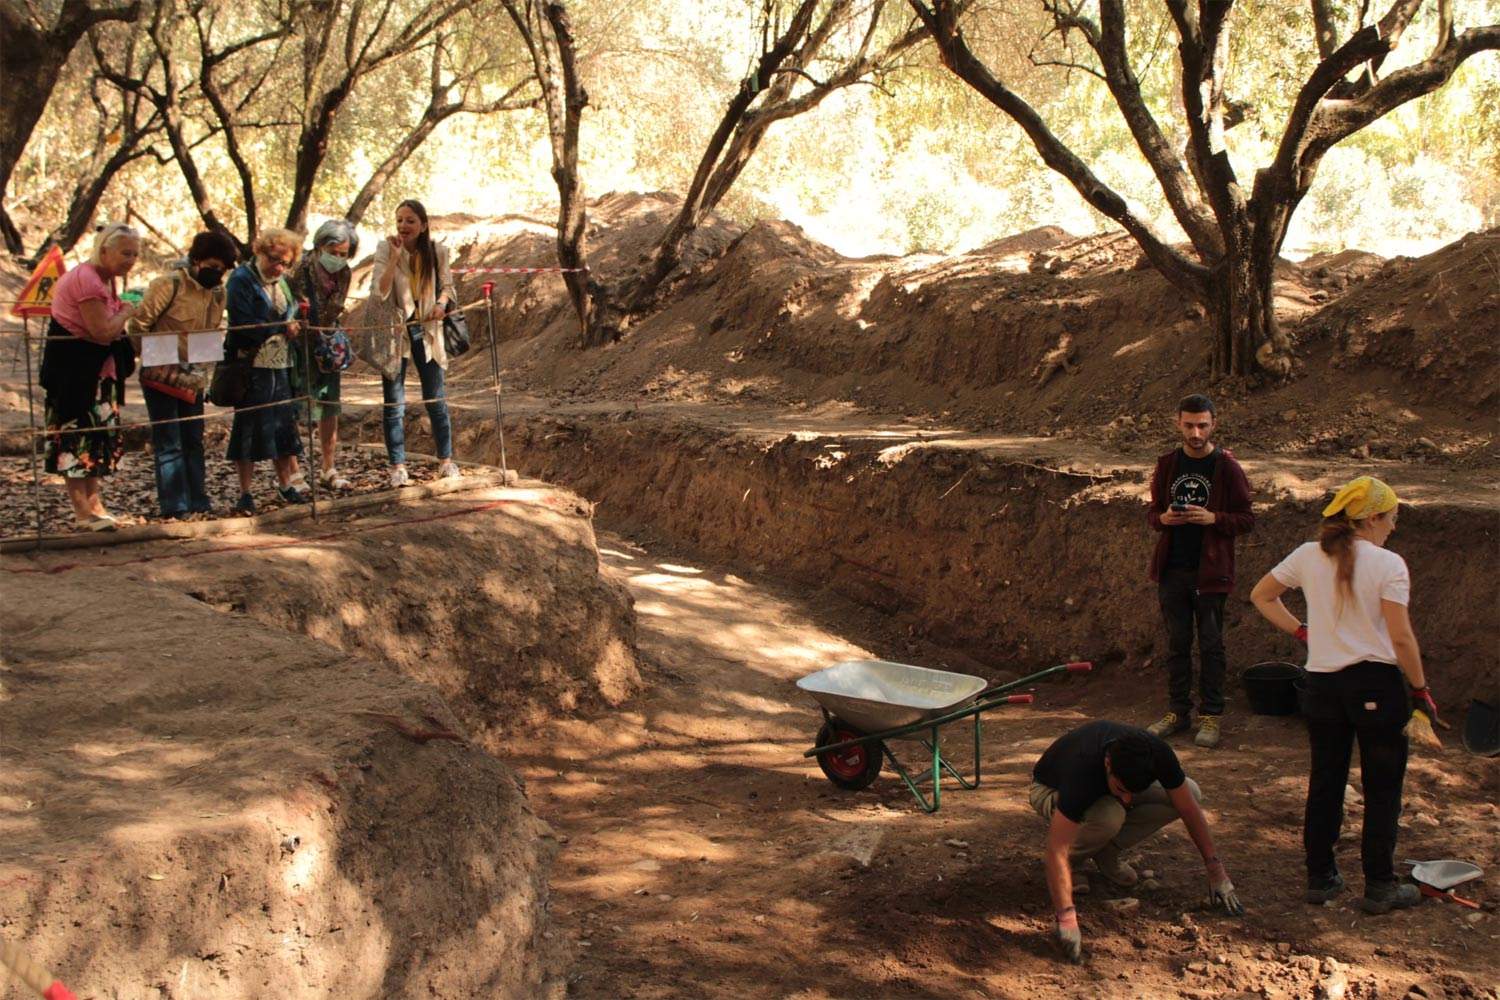 Rome, a new educational archaeological dig open to the public along the Appian Way